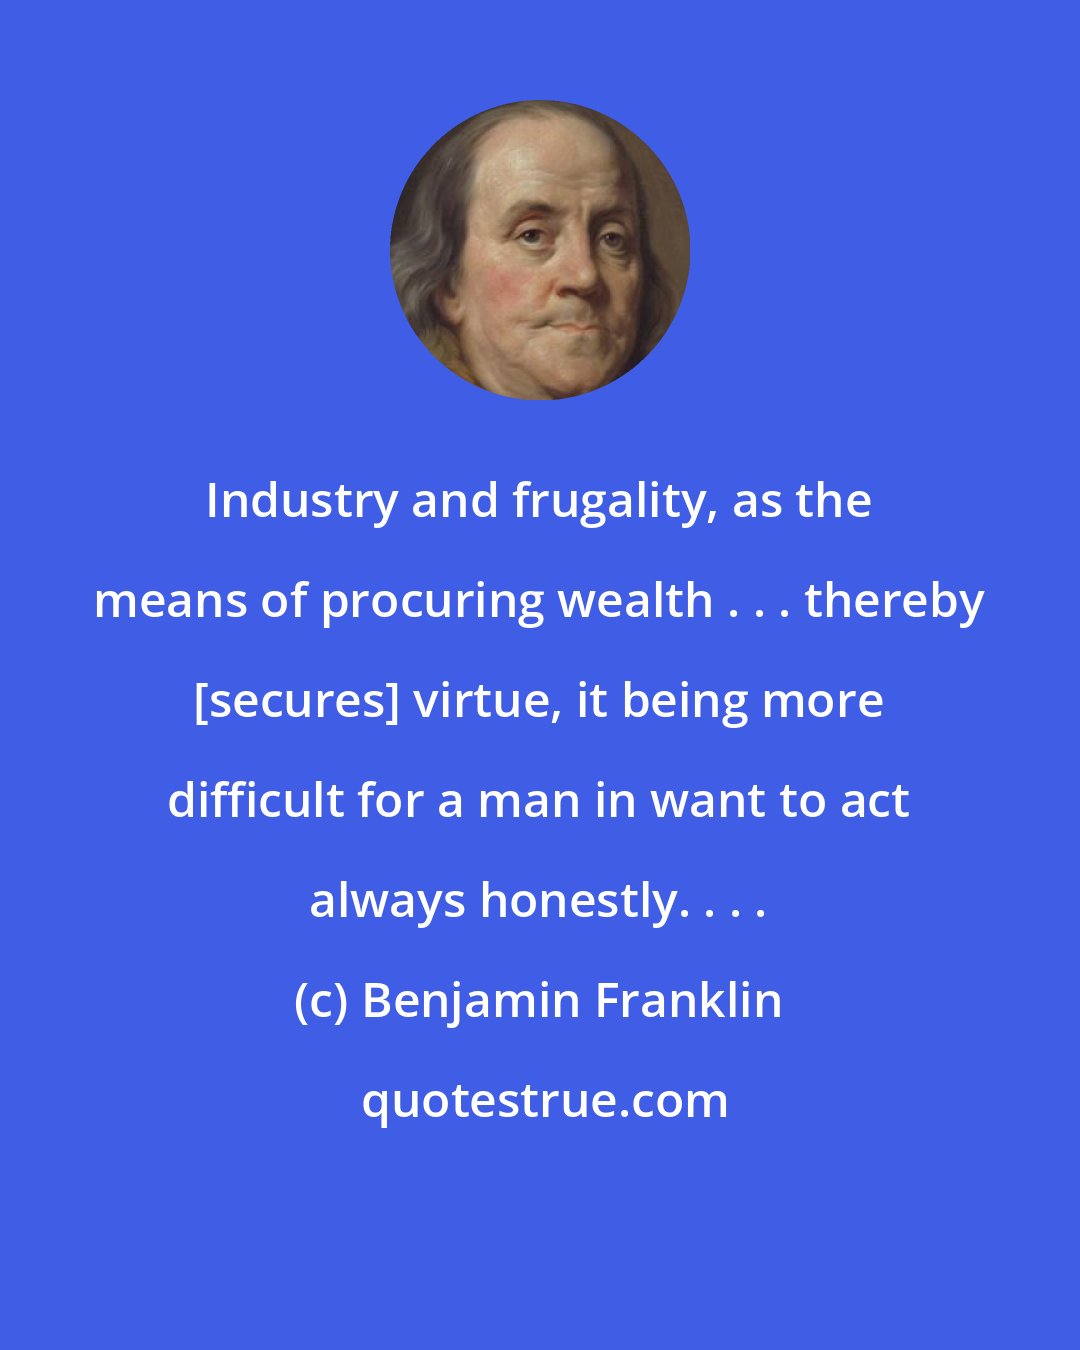 Benjamin Franklin: Industry and frugality, as the means of procuring wealth . . . thereby [secures] virtue, it being more difficult for a man in want to act always honestly. . . .